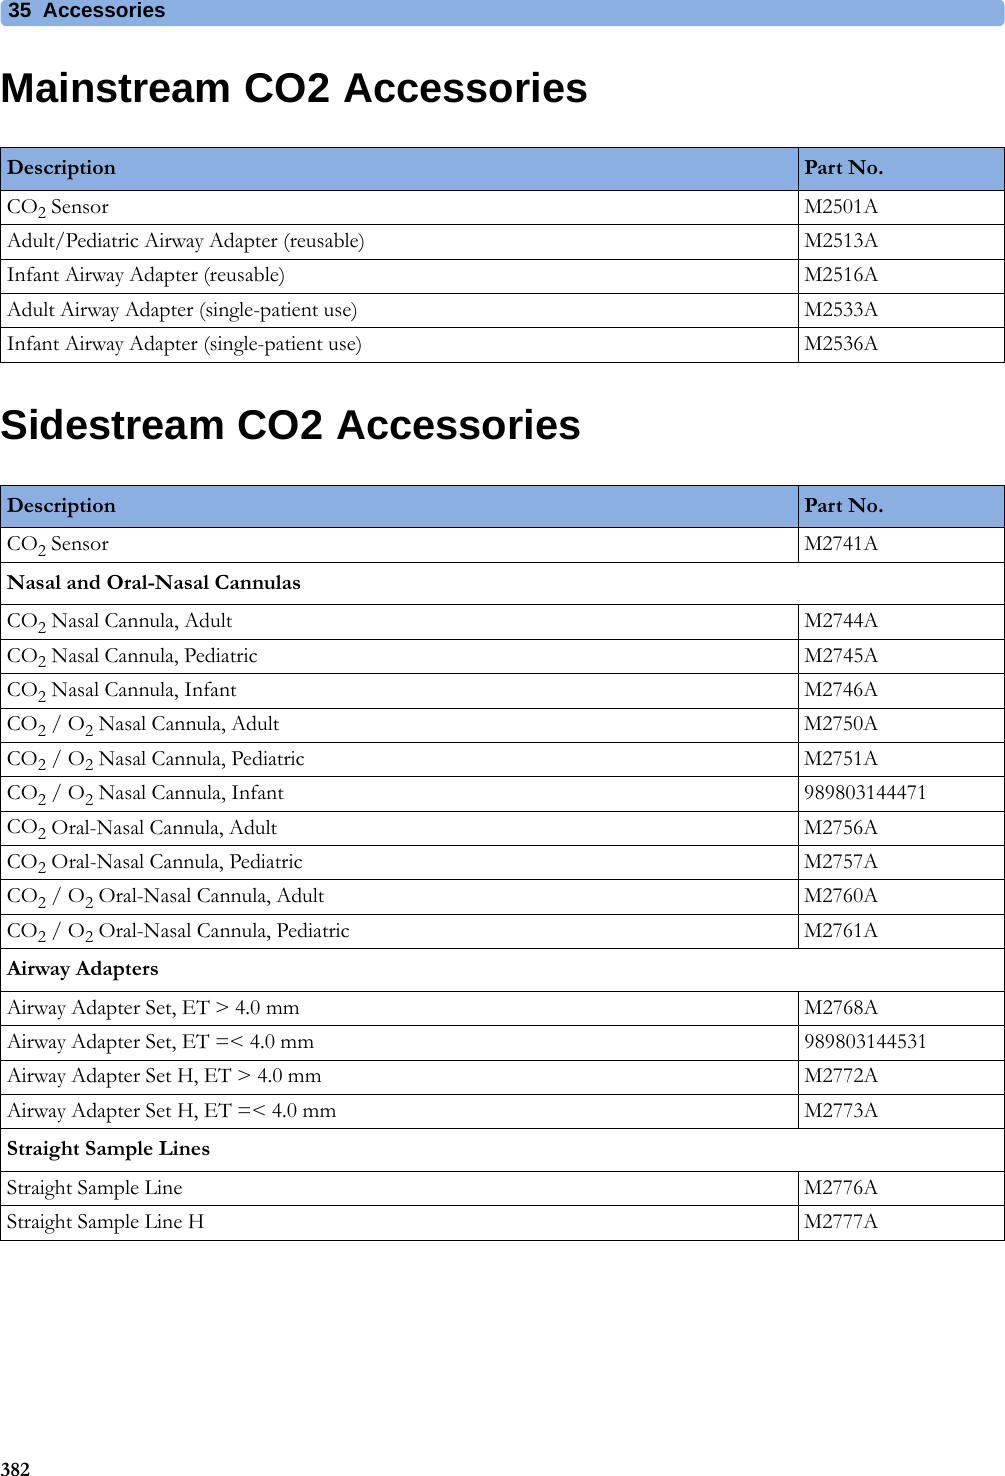 35 Accessories382Mainstream CO2 AccessoriesSidestream CO2 AccessoriesDescription Part No.CO2 Sensor M2501AAdult/Pediatric Airway Adapter (reusable) M2513AInfant Airway Adapter (reusable) M2516AAdult Airway Adapter (single-patient use) M2533AInfant Airway Adapter (single-patient use) M2536ADescription Part No.CO2 Sensor M2741ANasal and Oral-Nasal CannulasCO2 Nasal Cannula, Adult M2744ACO2 Nasal Cannula, Pediatric M2745ACO2 Nasal Cannula, Infant M2746ACO2 / O2 Nasal Cannula, Adult M2750ACO2 / O2 Nasal Cannula, Pediatric M2751ACO2 / O2 Nasal Cannula, Infant 989803144471CO2 Oral-Nasal Cannula, Adult M2756ACO2 Oral-Nasal Cannula, Pediatric M2757ACO2 / O2 Oral-Nasal Cannula, Adult M2760ACO2 / O2 Oral-Nasal Cannula, Pediatric M2761AAirway AdaptersAirway Adapter Set, ET &gt; 4.0 mm M2768AAirway Adapter Set, ET =&lt; 4.0 mm 989803144531Airway Adapter Set H, ET &gt; 4.0 mm M2772AAirway Adapter Set H, ET =&lt; 4.0 mm M2773AStraight Sample LinesStraight Sample Line M2776AStraight Sample Line H M2777A